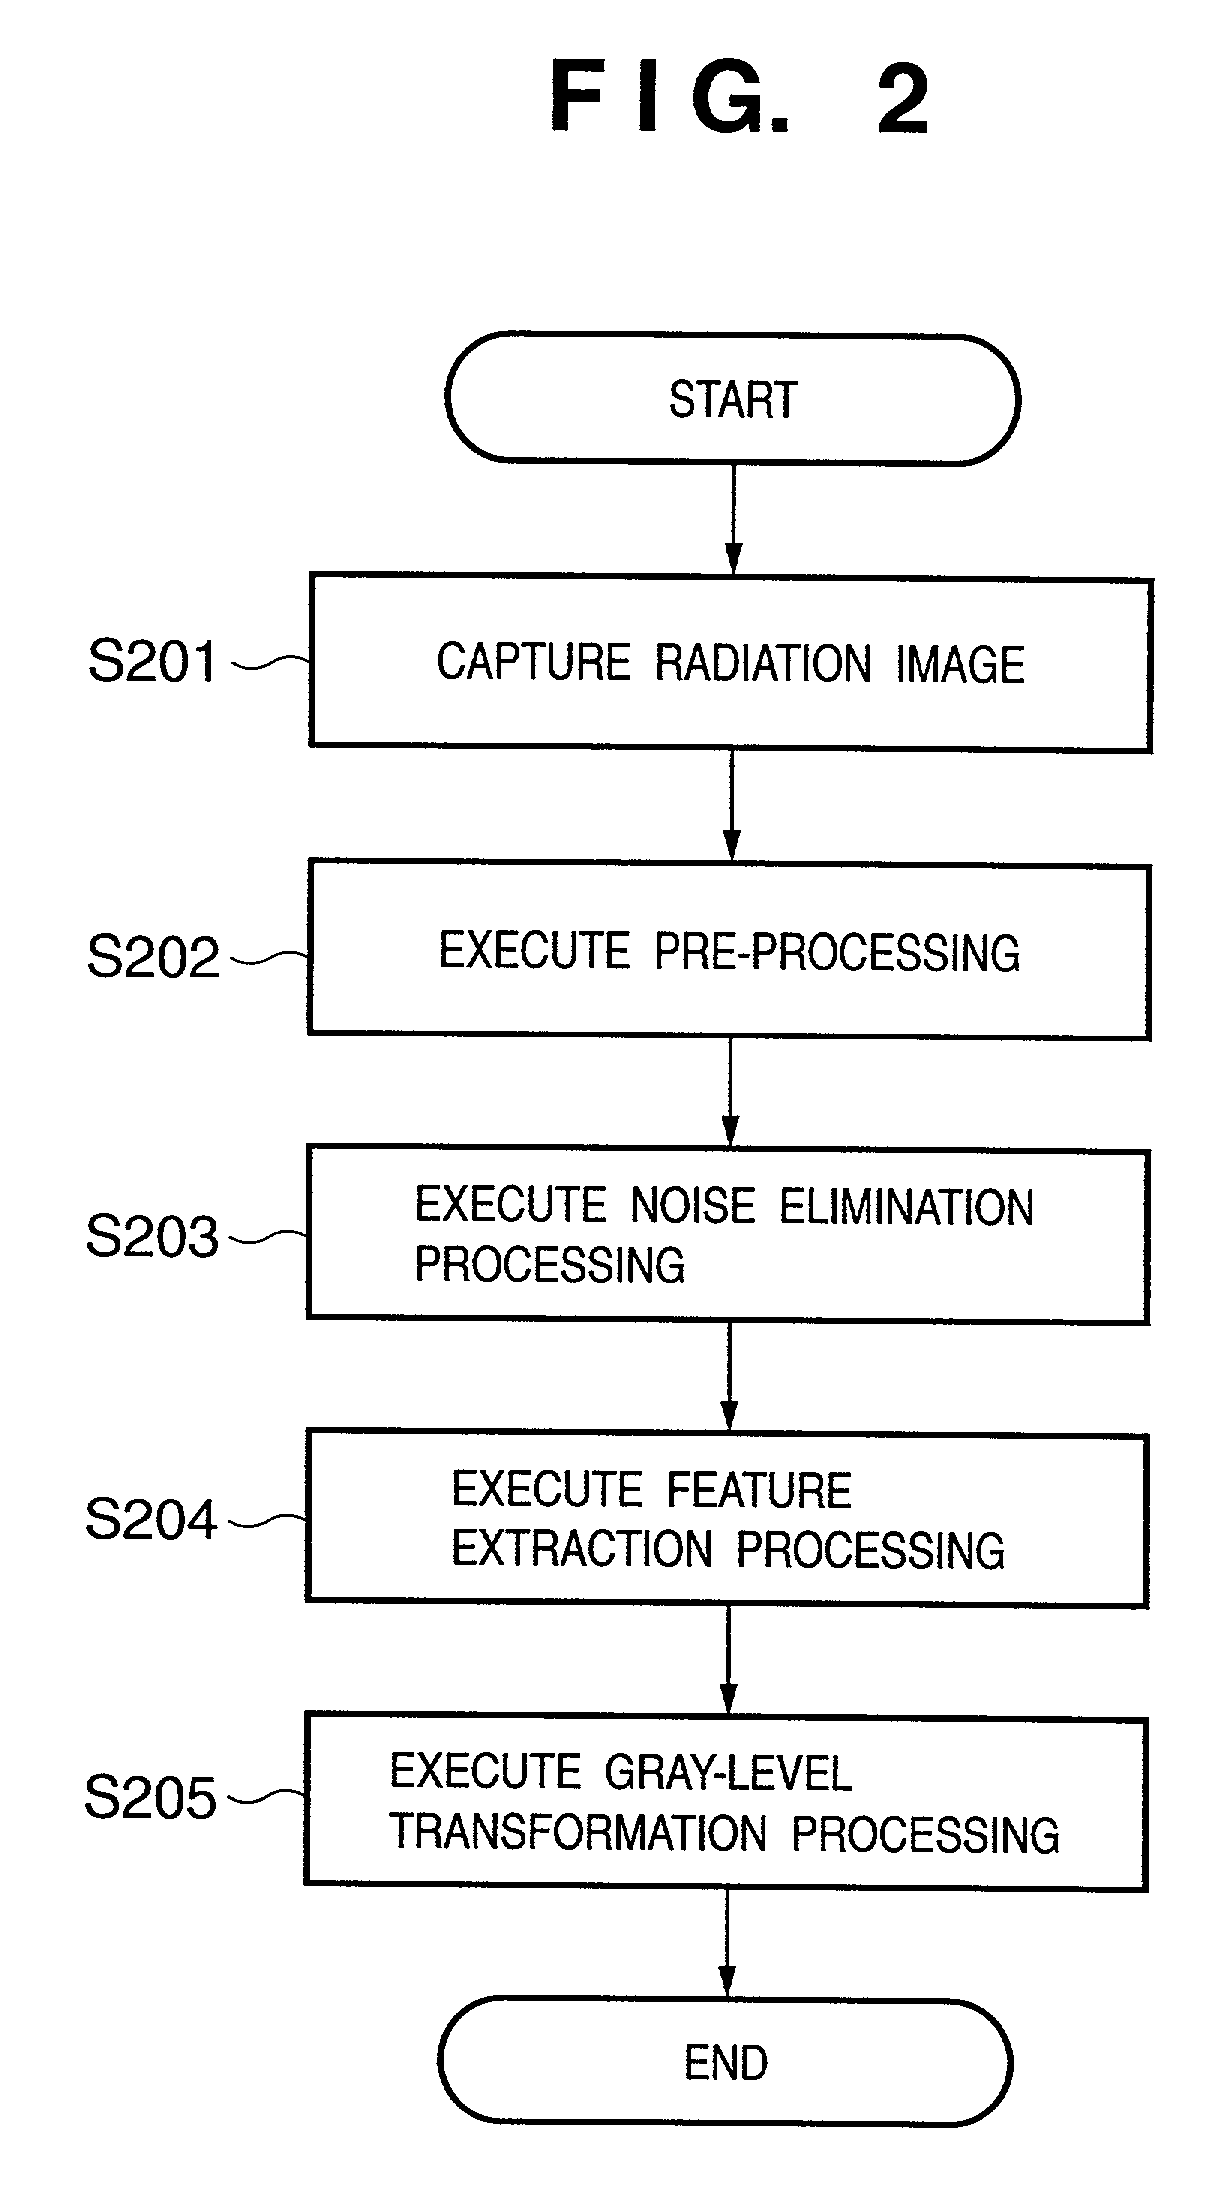 Image processing apparatus, image processing method, program for implementing said method, and storage medium therefor